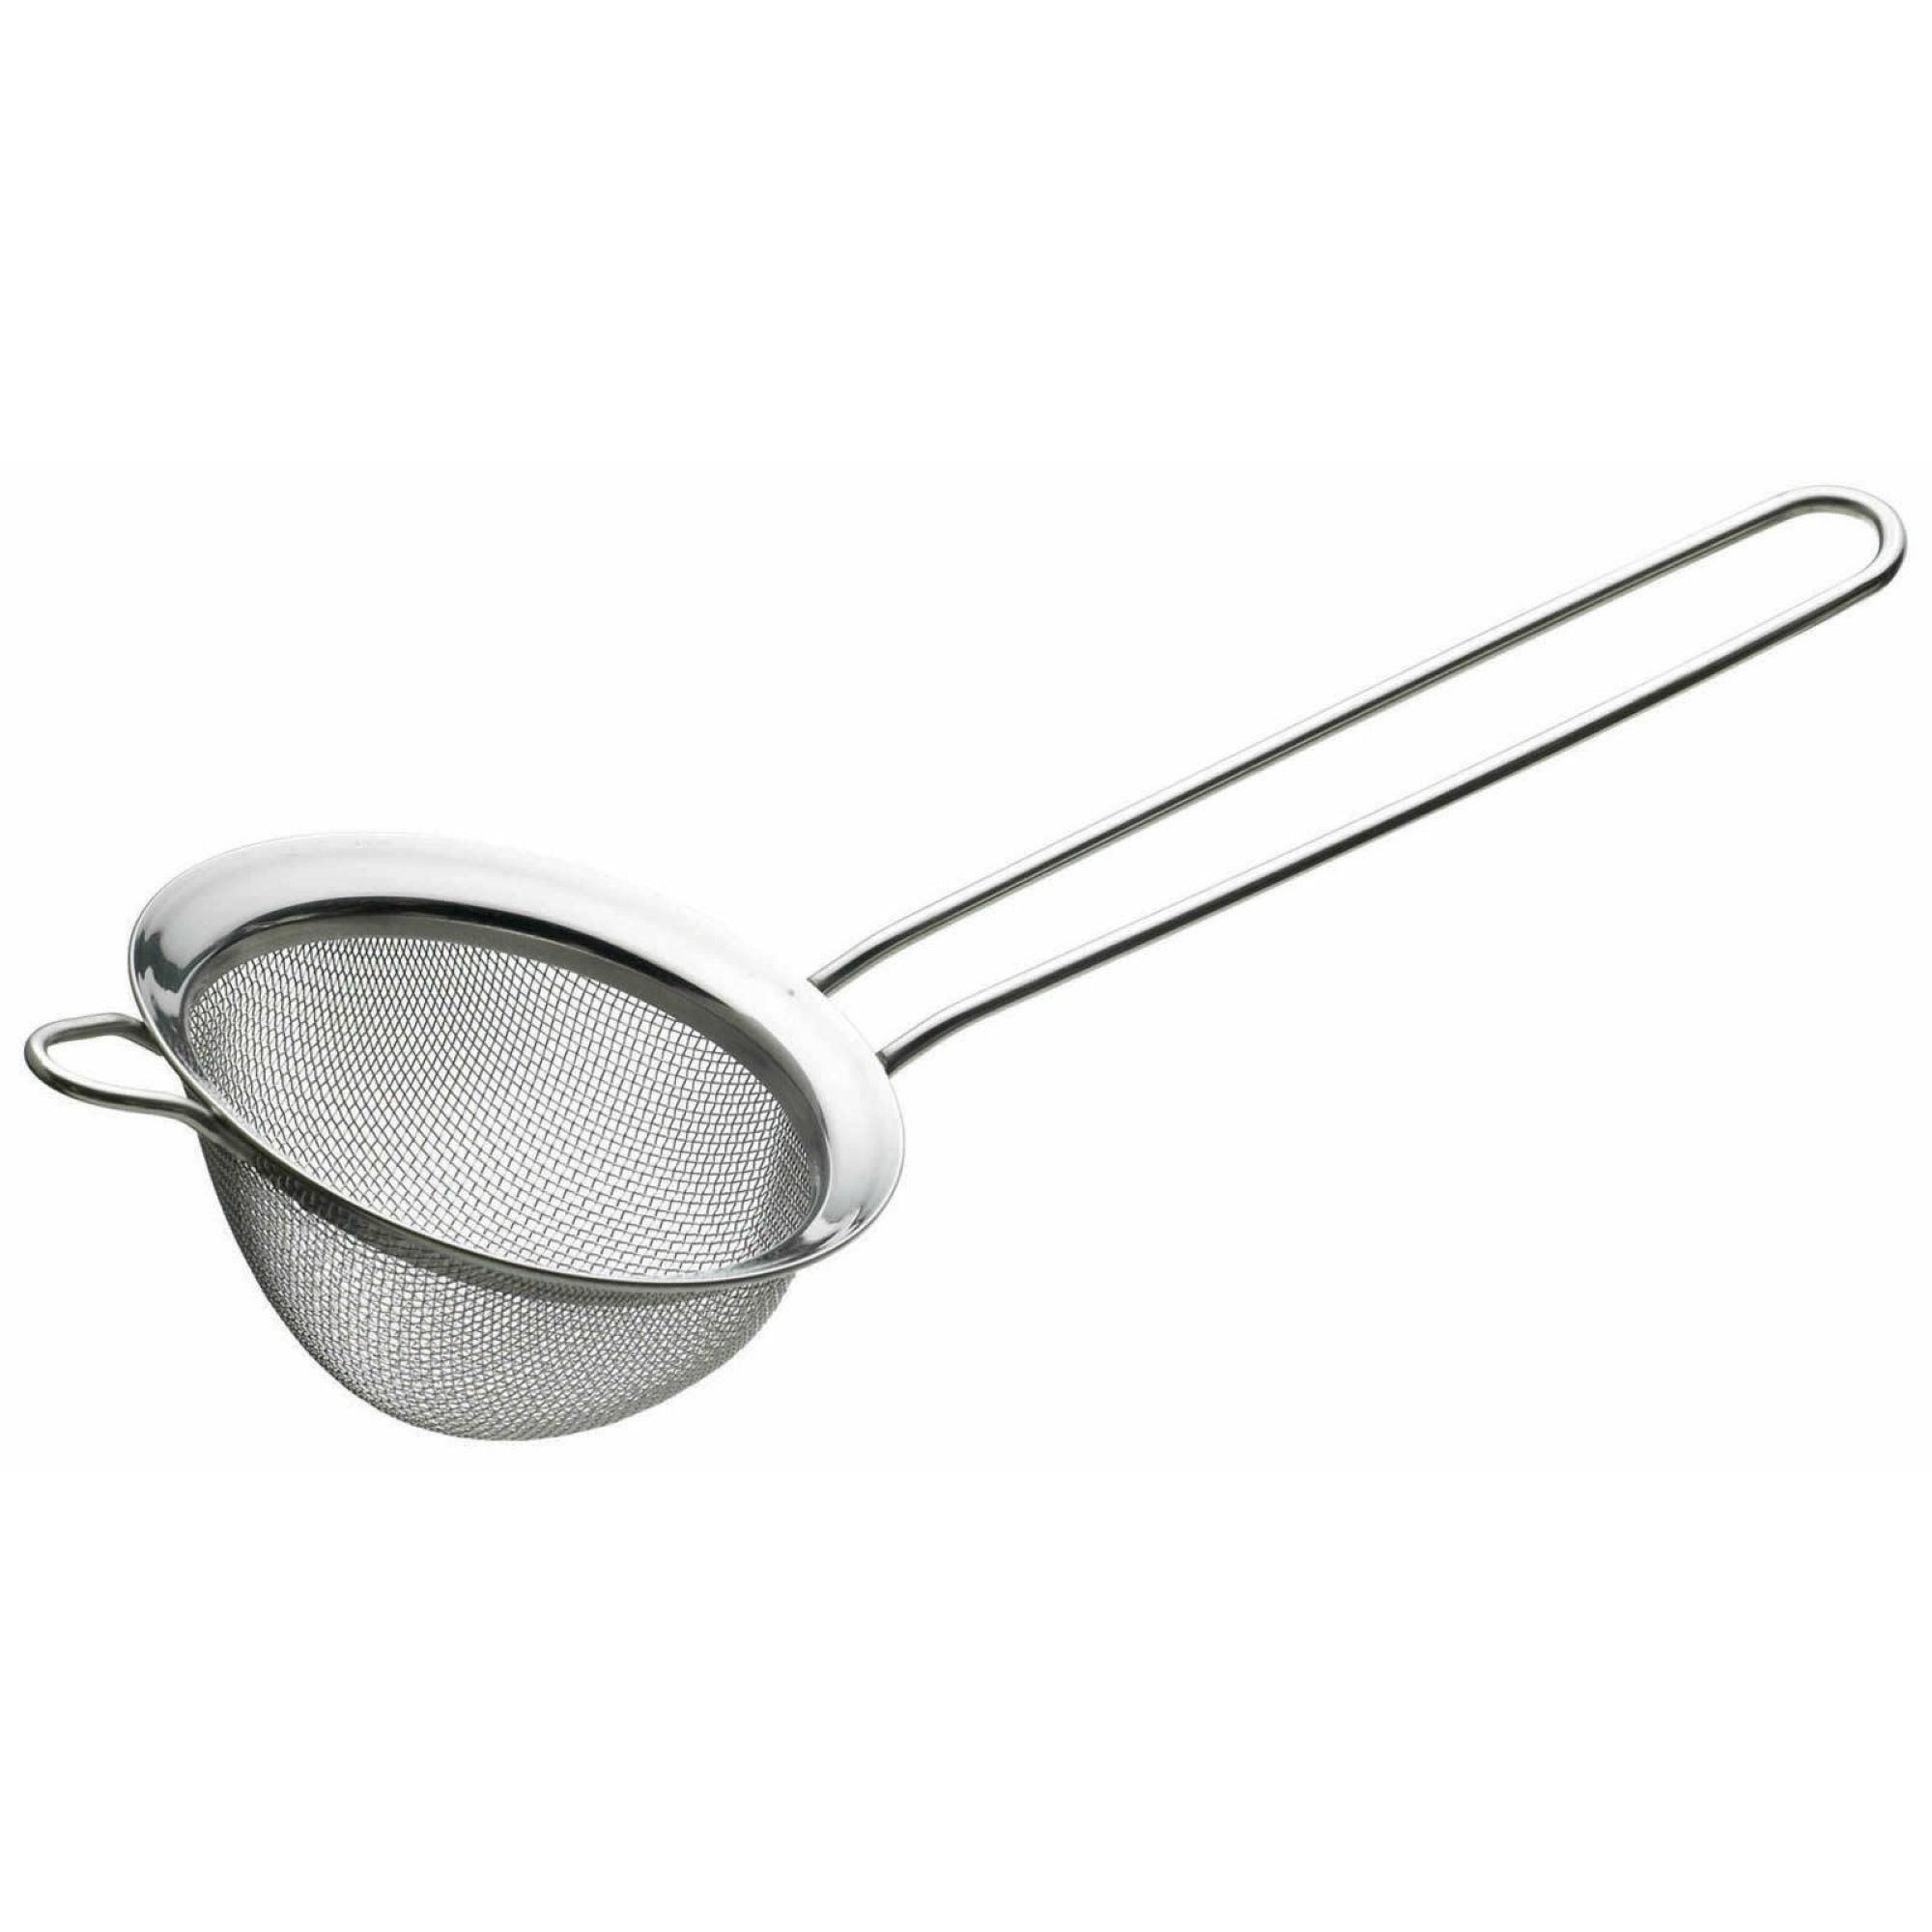 Le’Xpress Stainless Steel Tea Strainer - The Cooks Cupboard Ltd